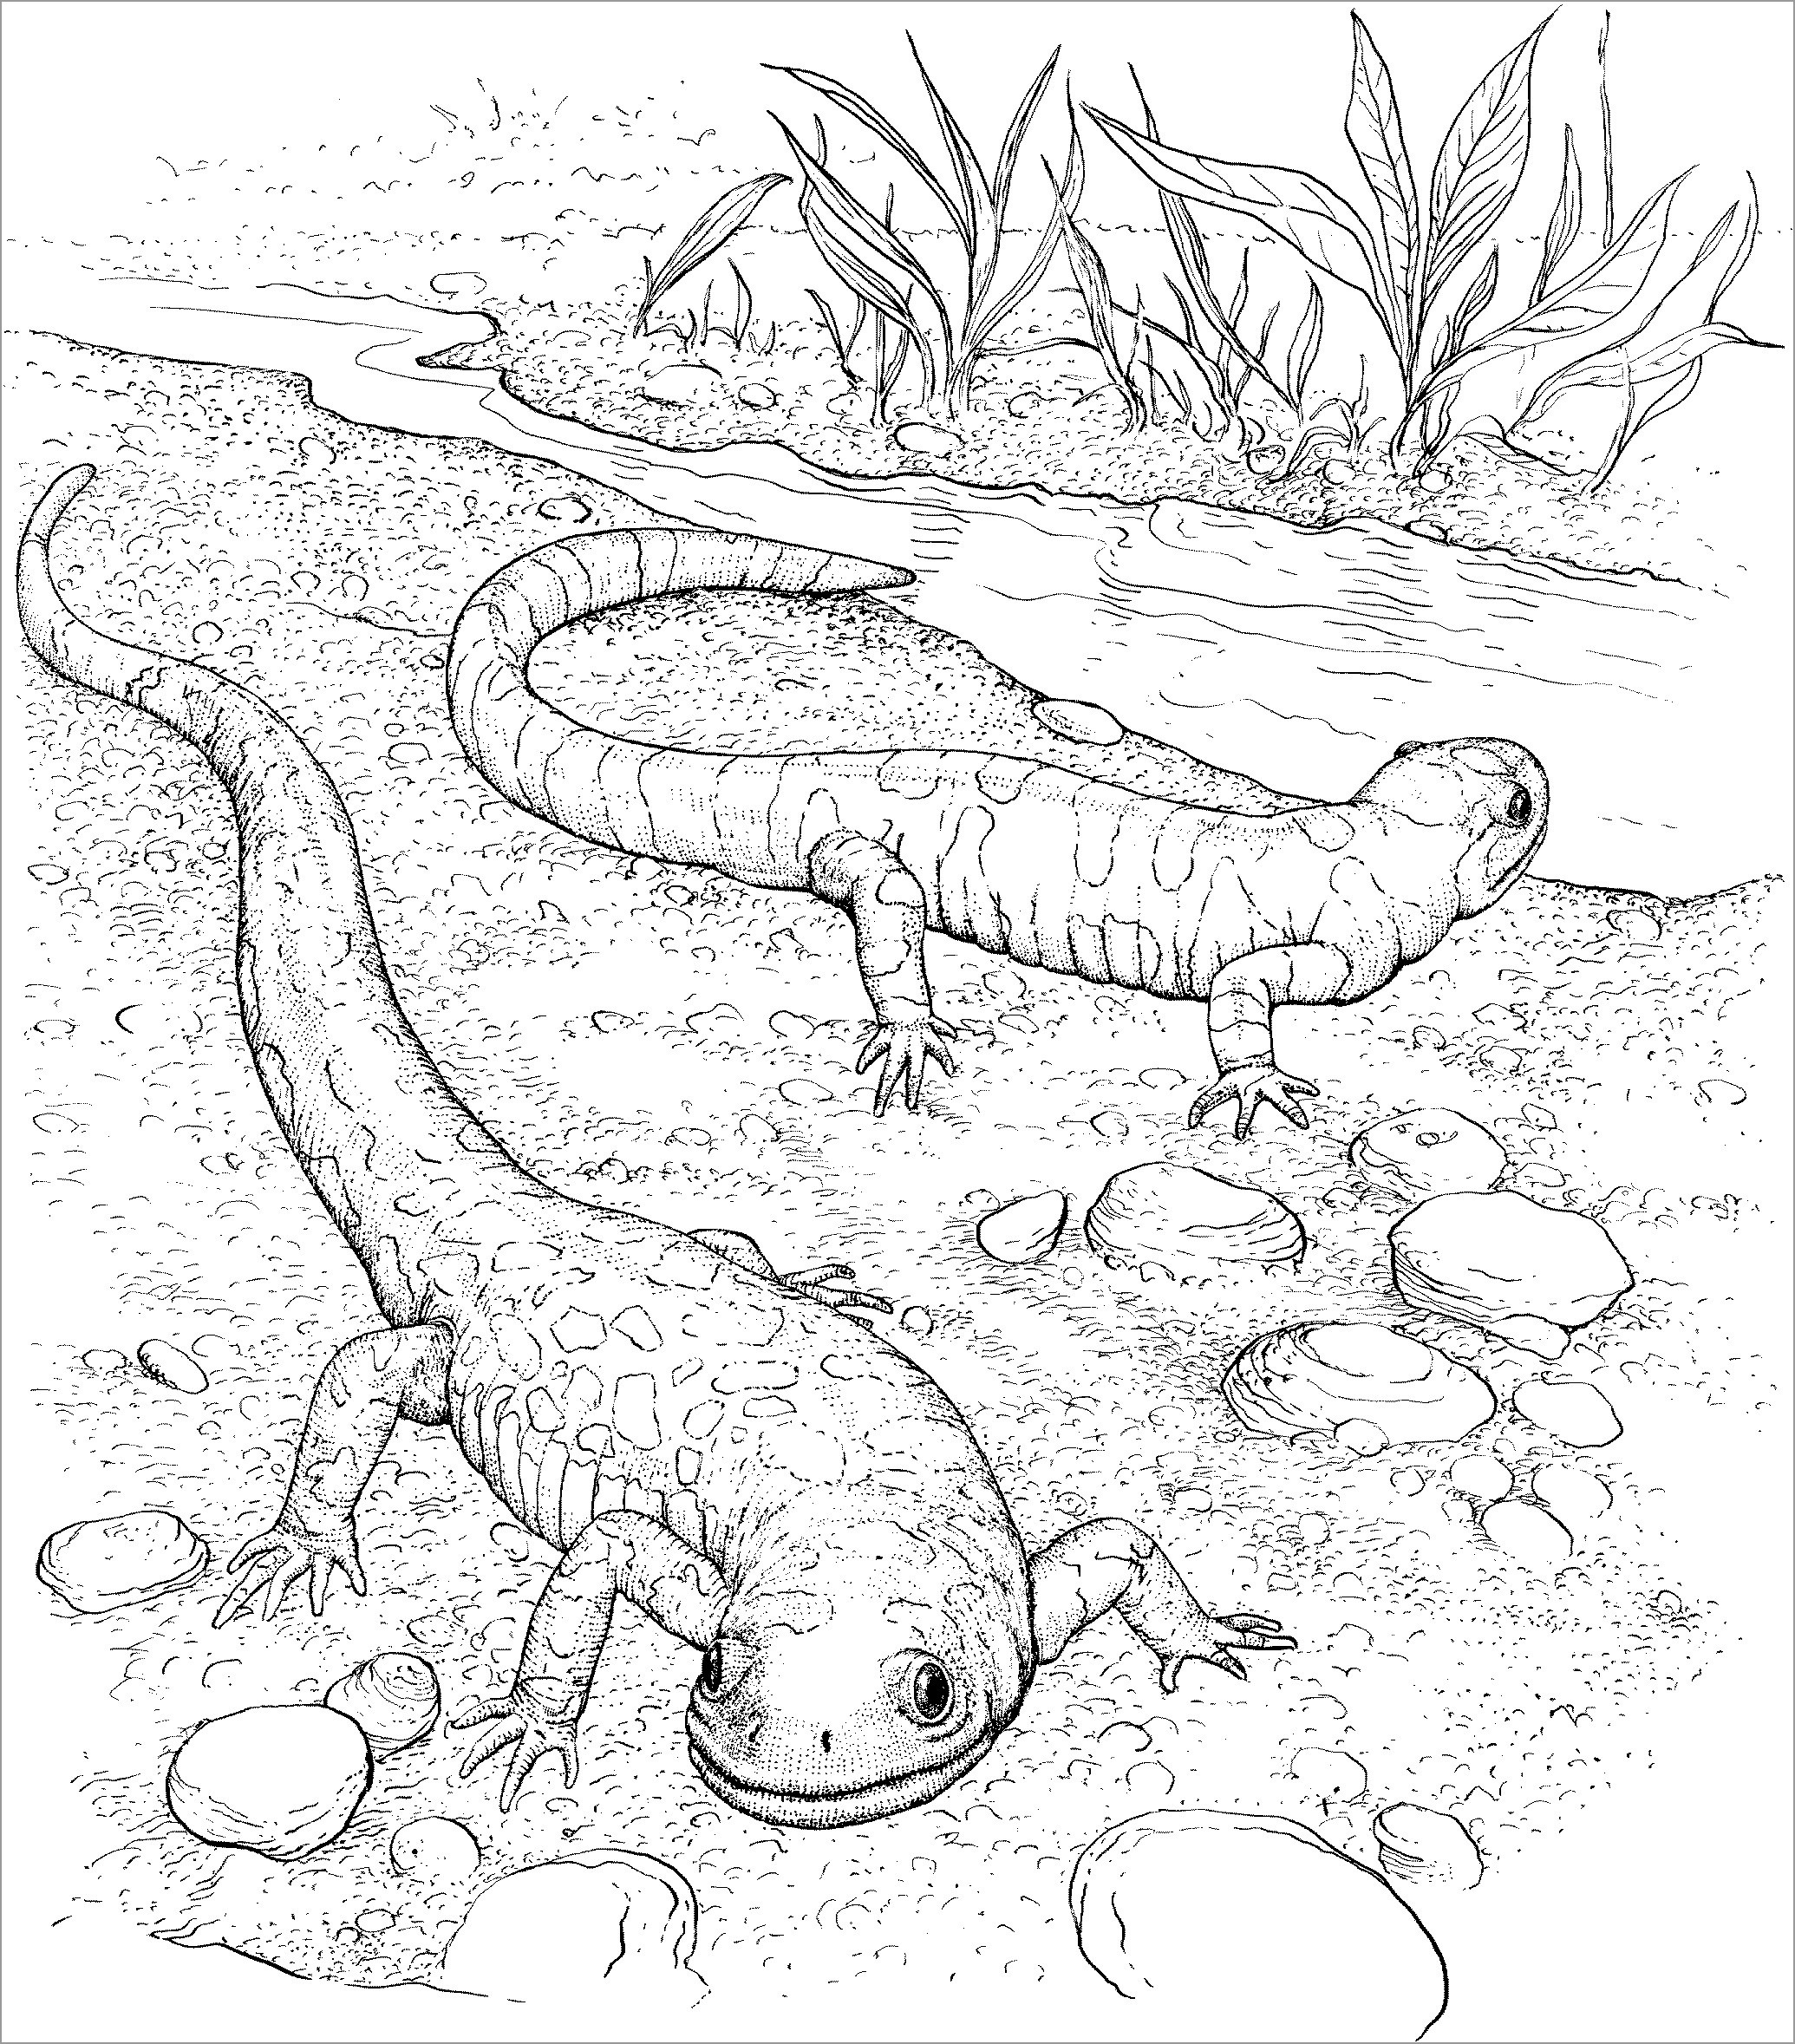 Realistic Lizard Coloring Pages - ColoringBay